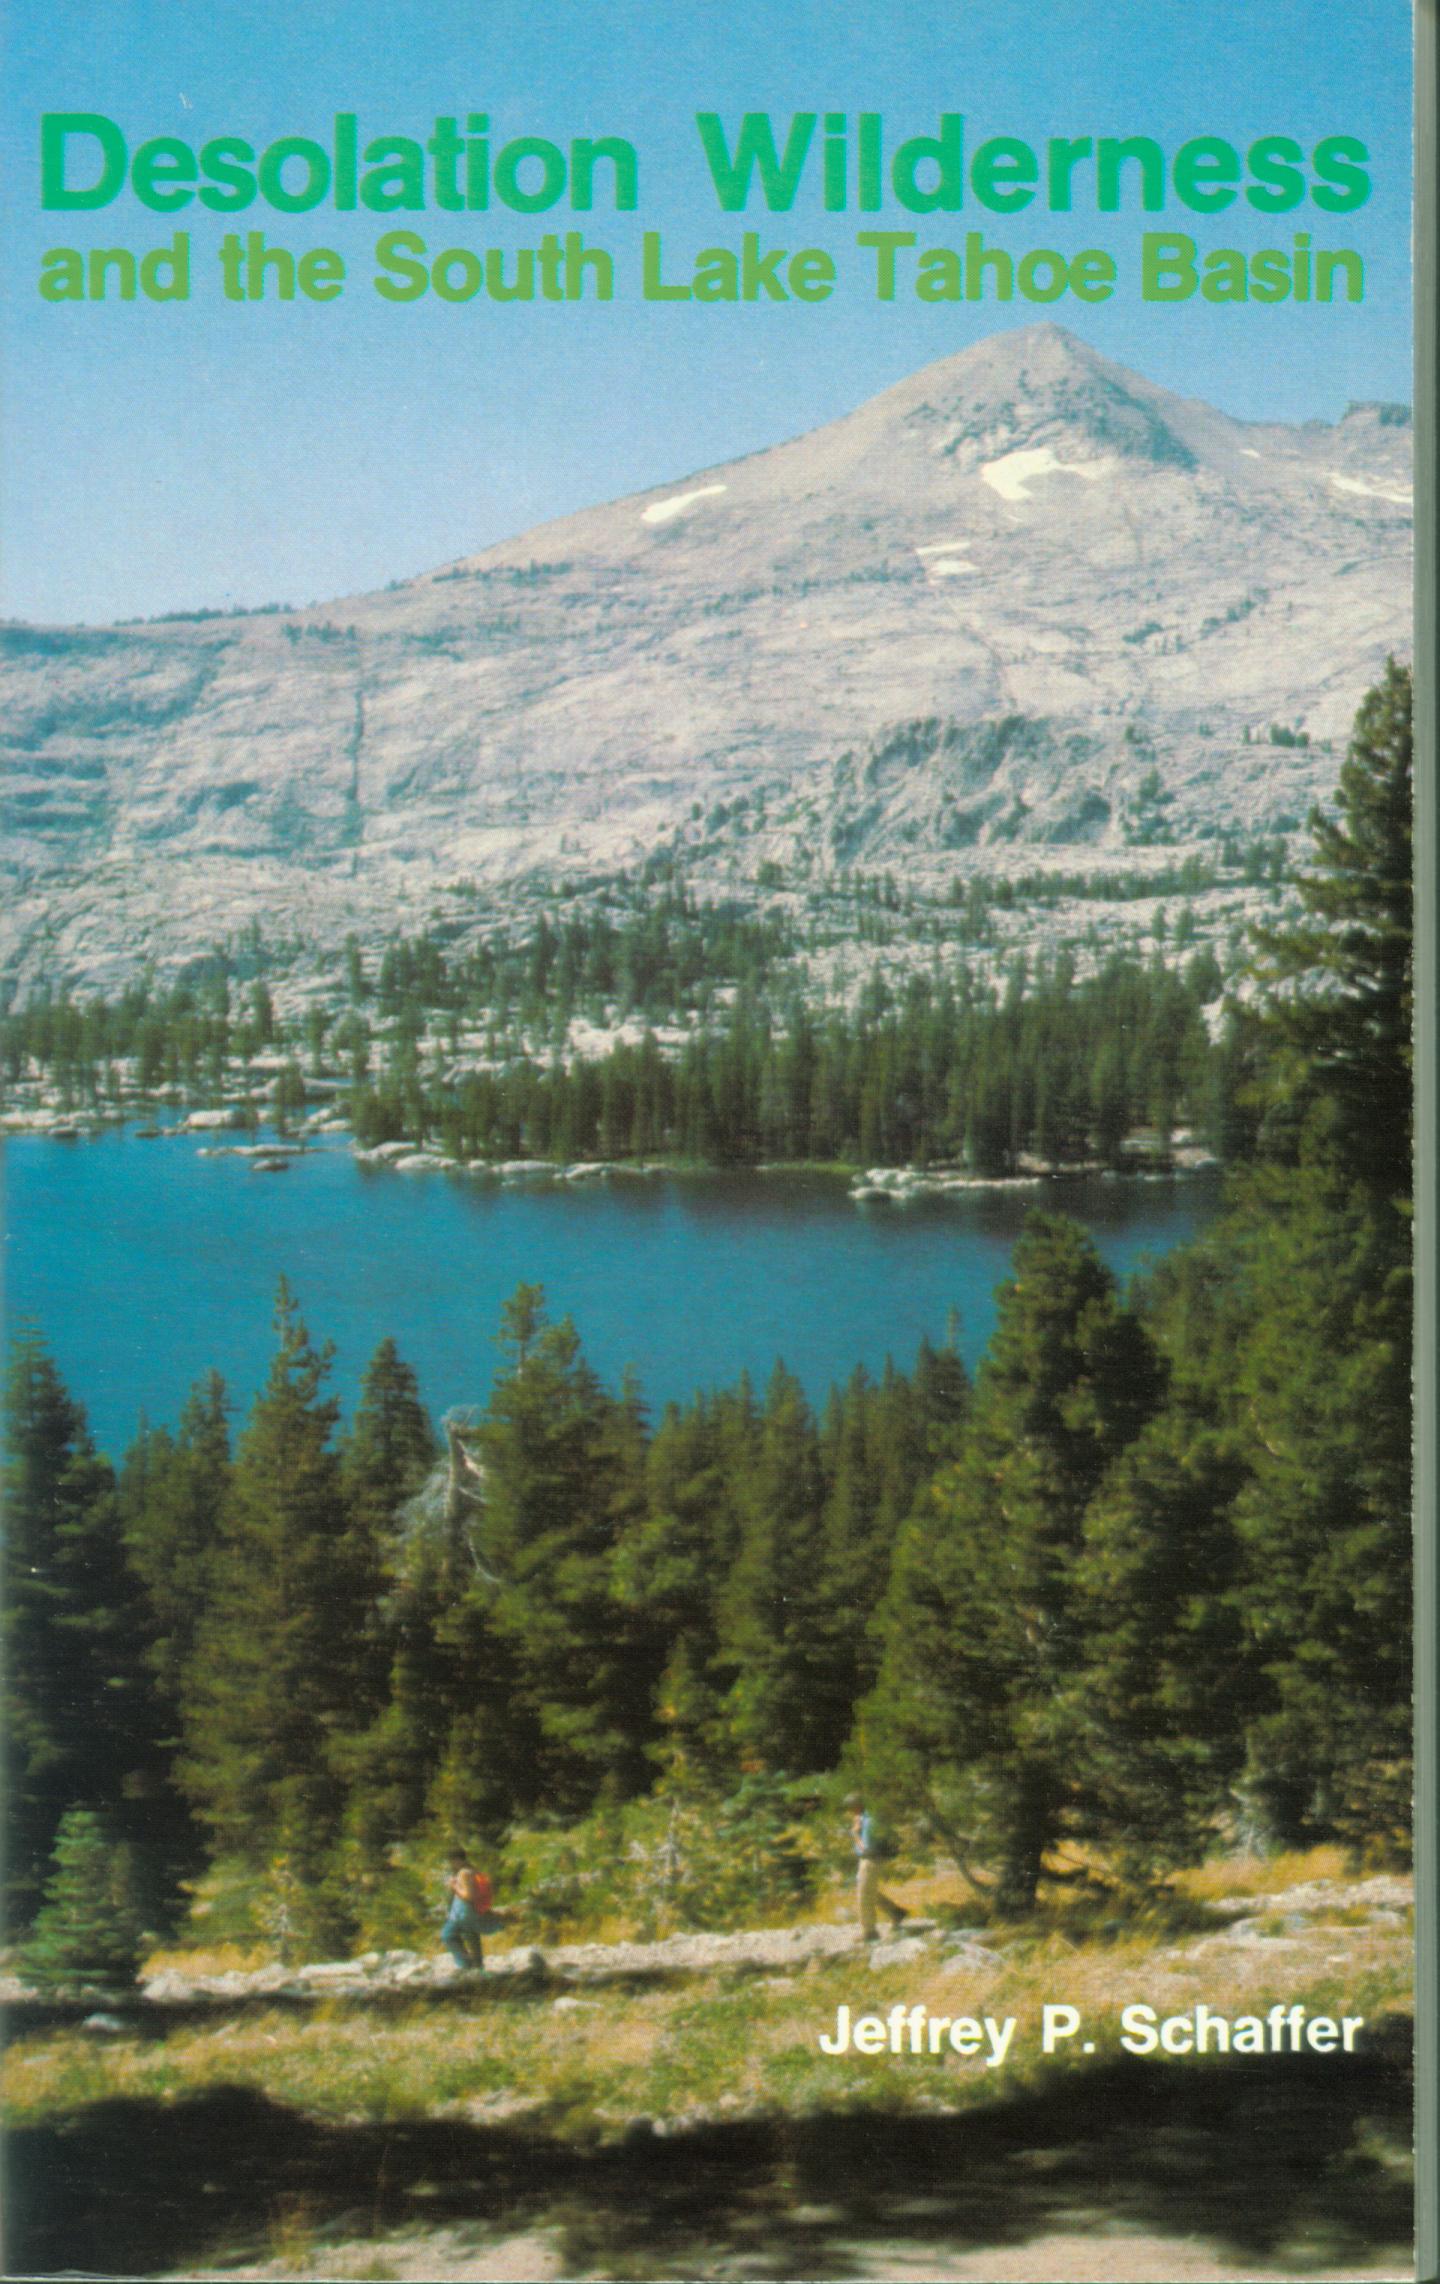 DESOLATION WILDERNESS and the South Lake Tahoe Basin.